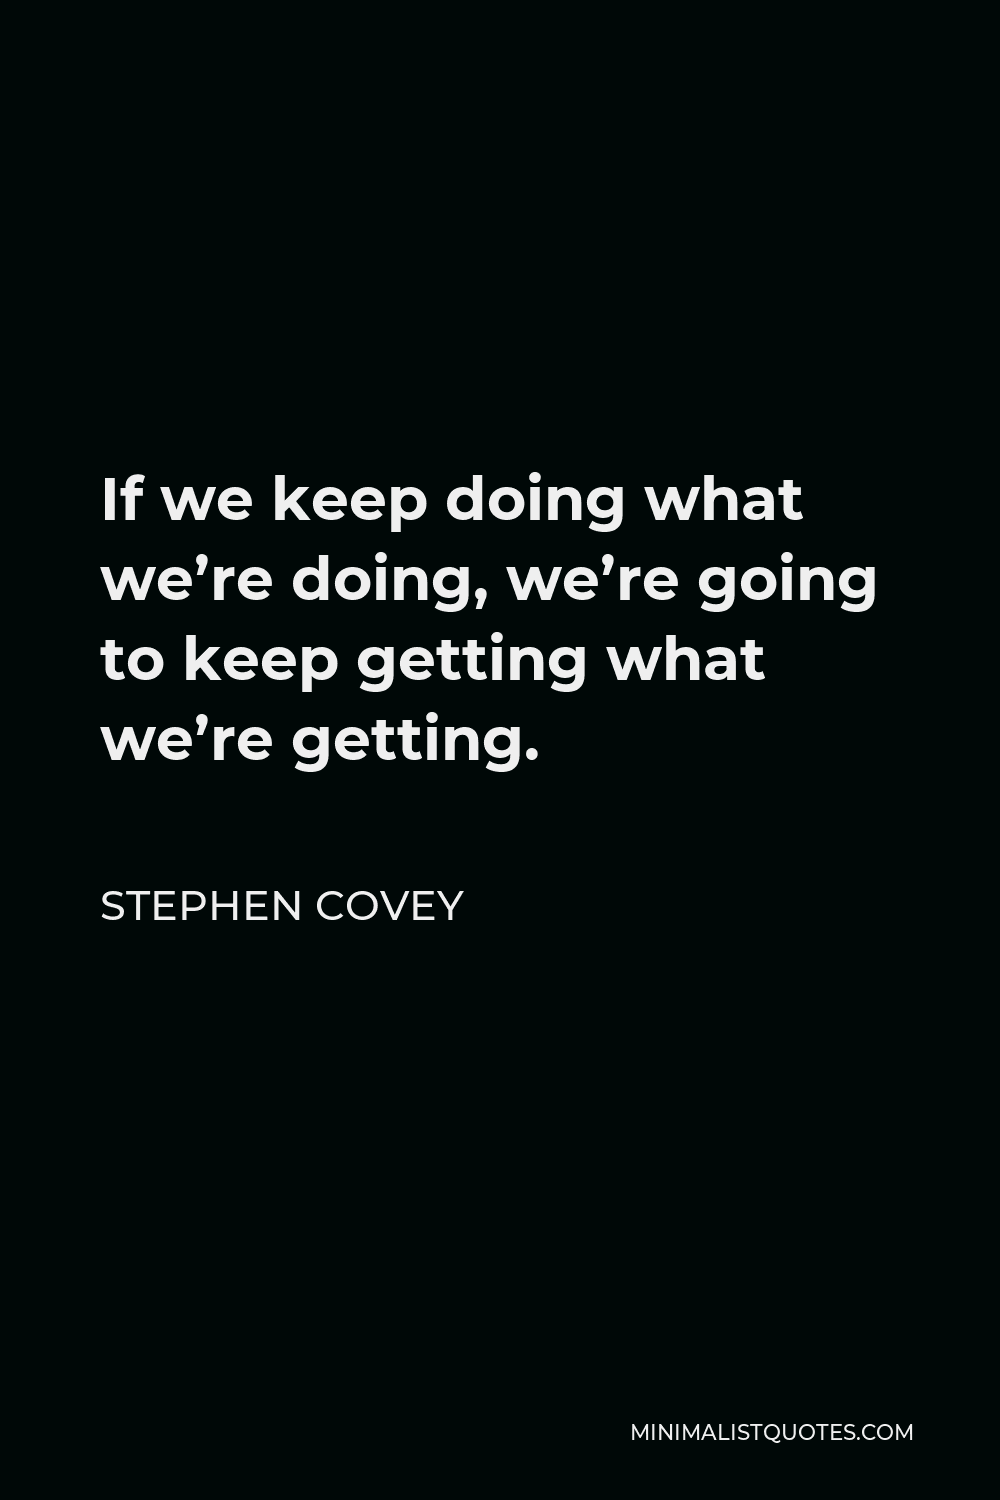 Stephen Covey Quote - If we keep doing what we’re doing, we’re going to keep getting what we’re getting.